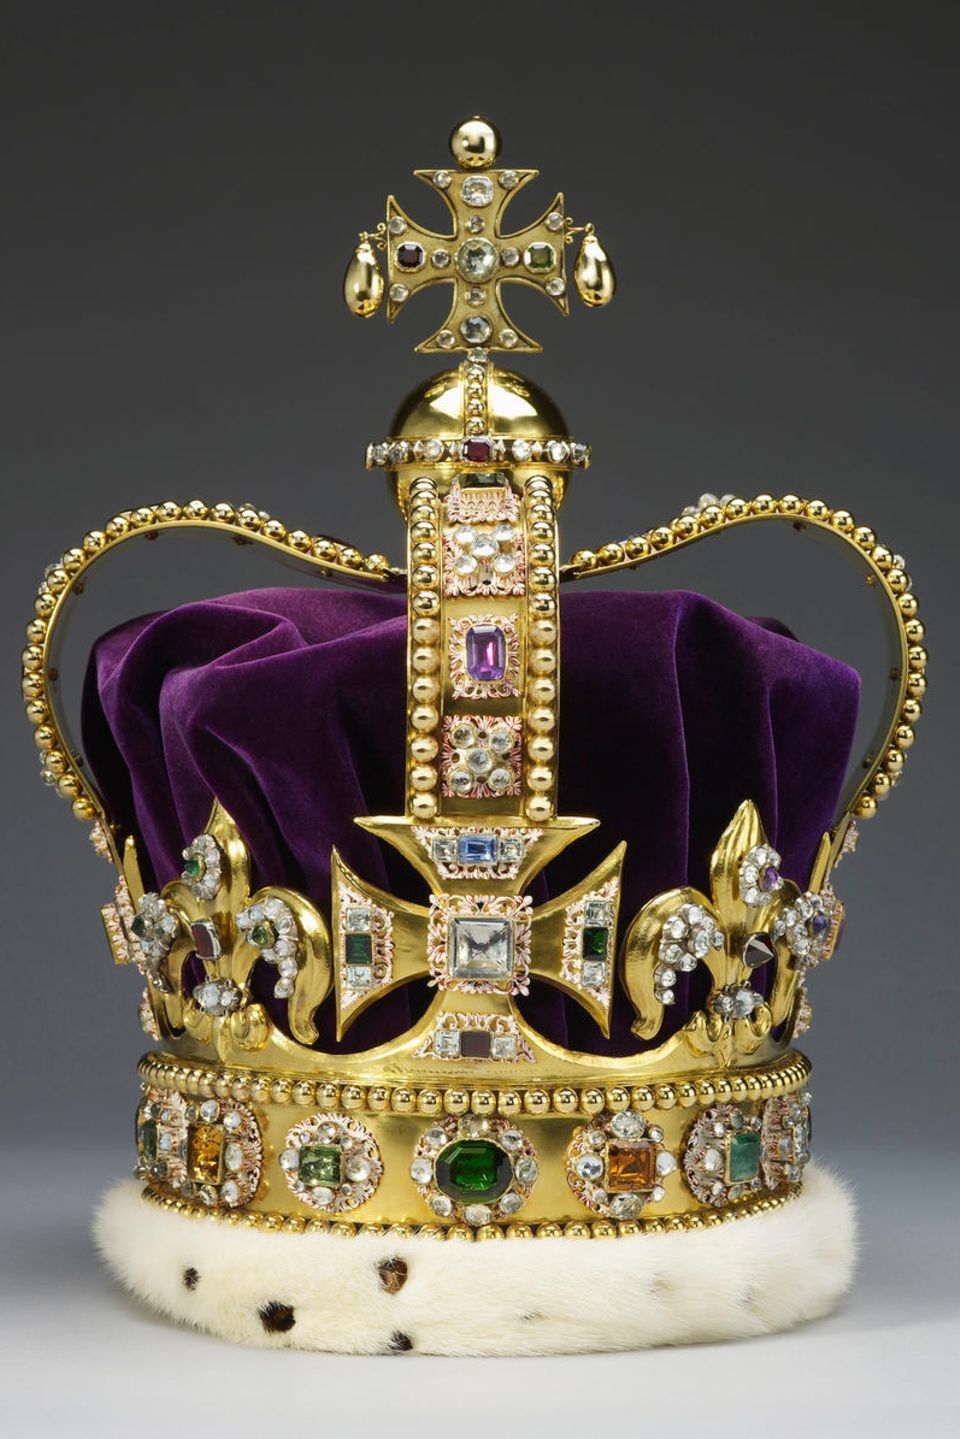 The "St Edward's Crown